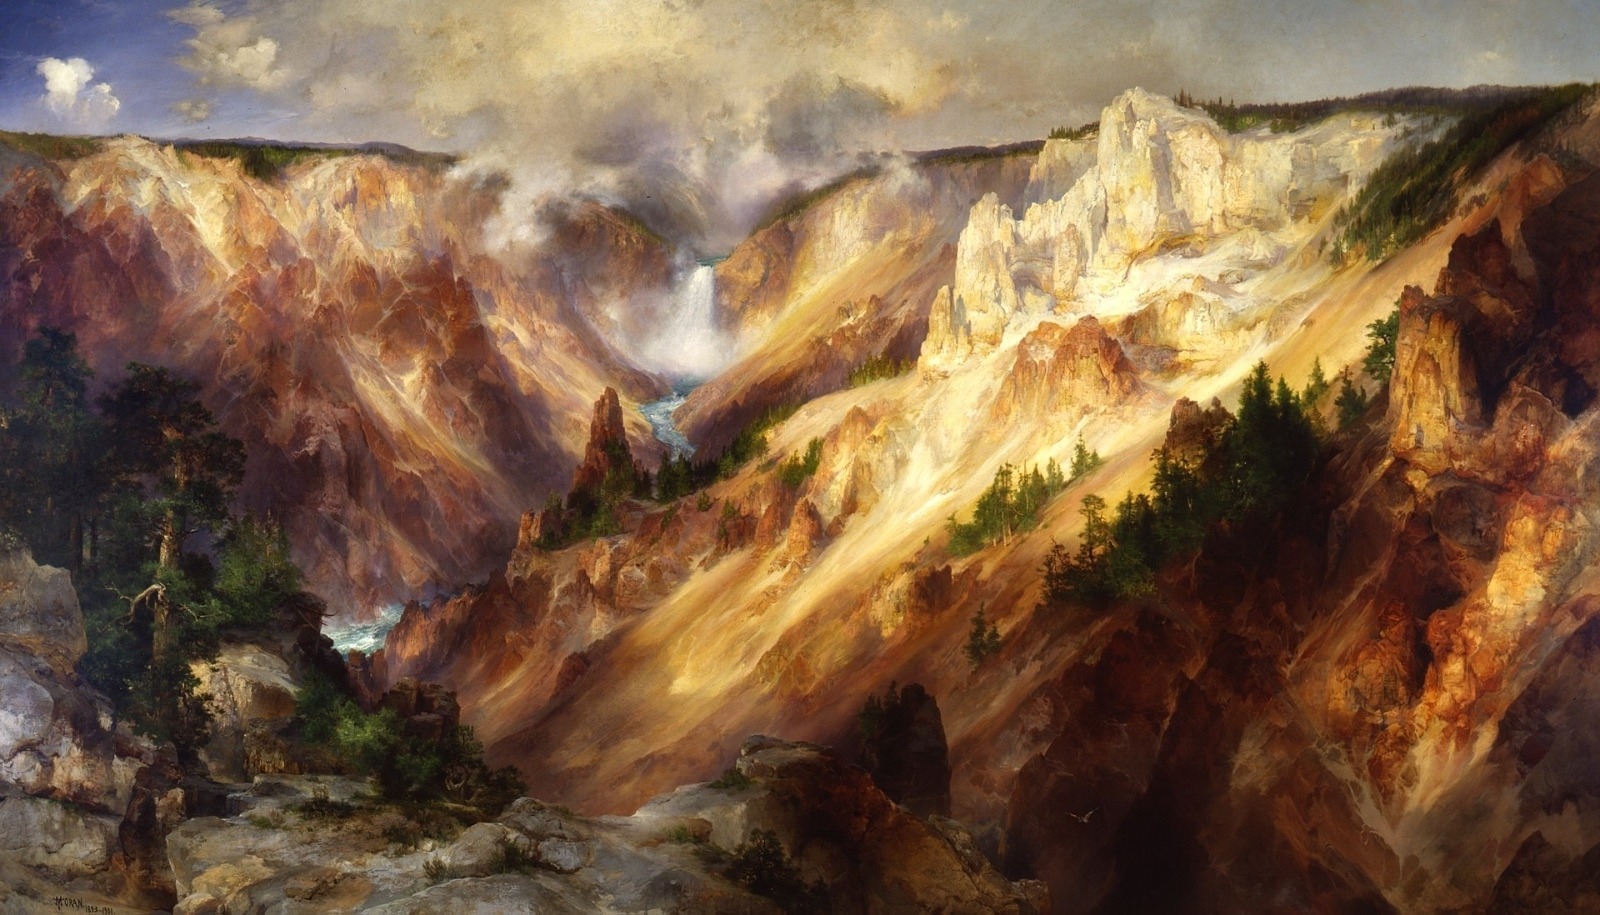 &quot;Grand Canon of the Yellowstone&quot; by Thomas Moran. This is the most famous and consequential land-protection painting in the world, for it made members of Congress swoon and ignited the global national park movement that started with the creation of Yellowstone on March 1 in 1872. Painting can be viewed, as part of your own heritage, at the Smithsonian's American Art Museum in Washington, D.C. 